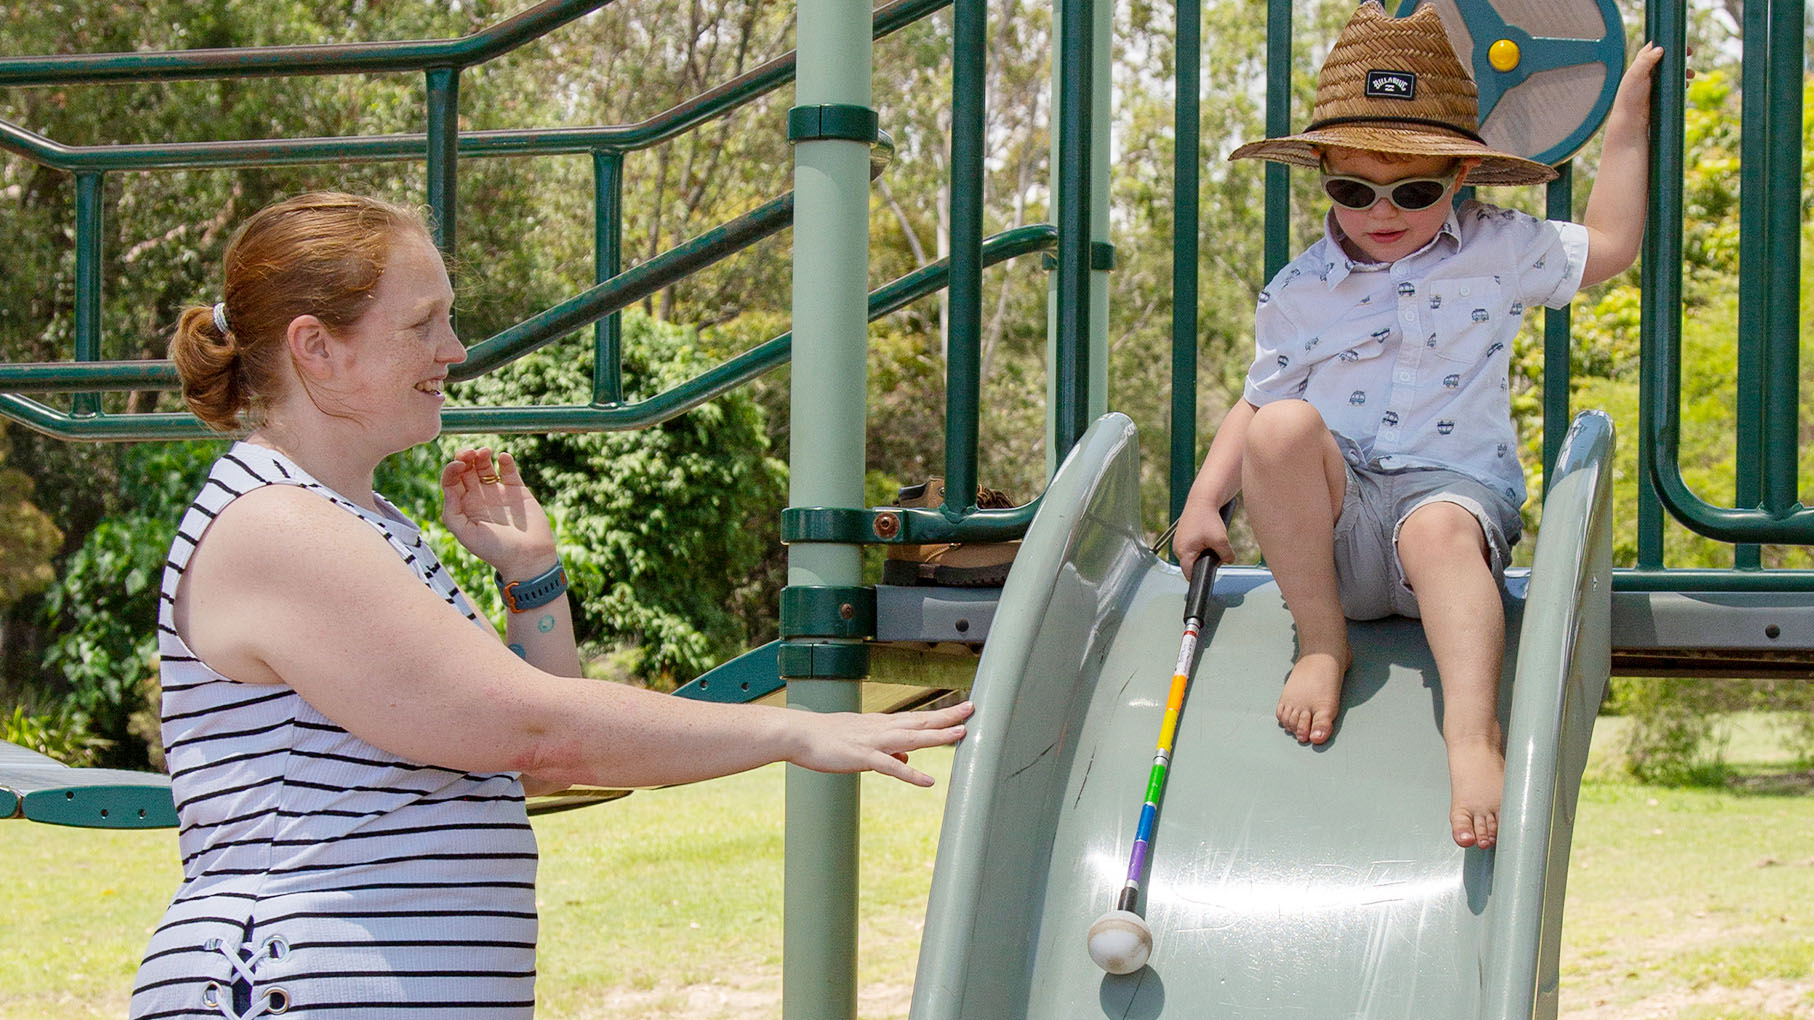 Hugo prepares to slide down the slide, holding his white cane, and his mum is by his side